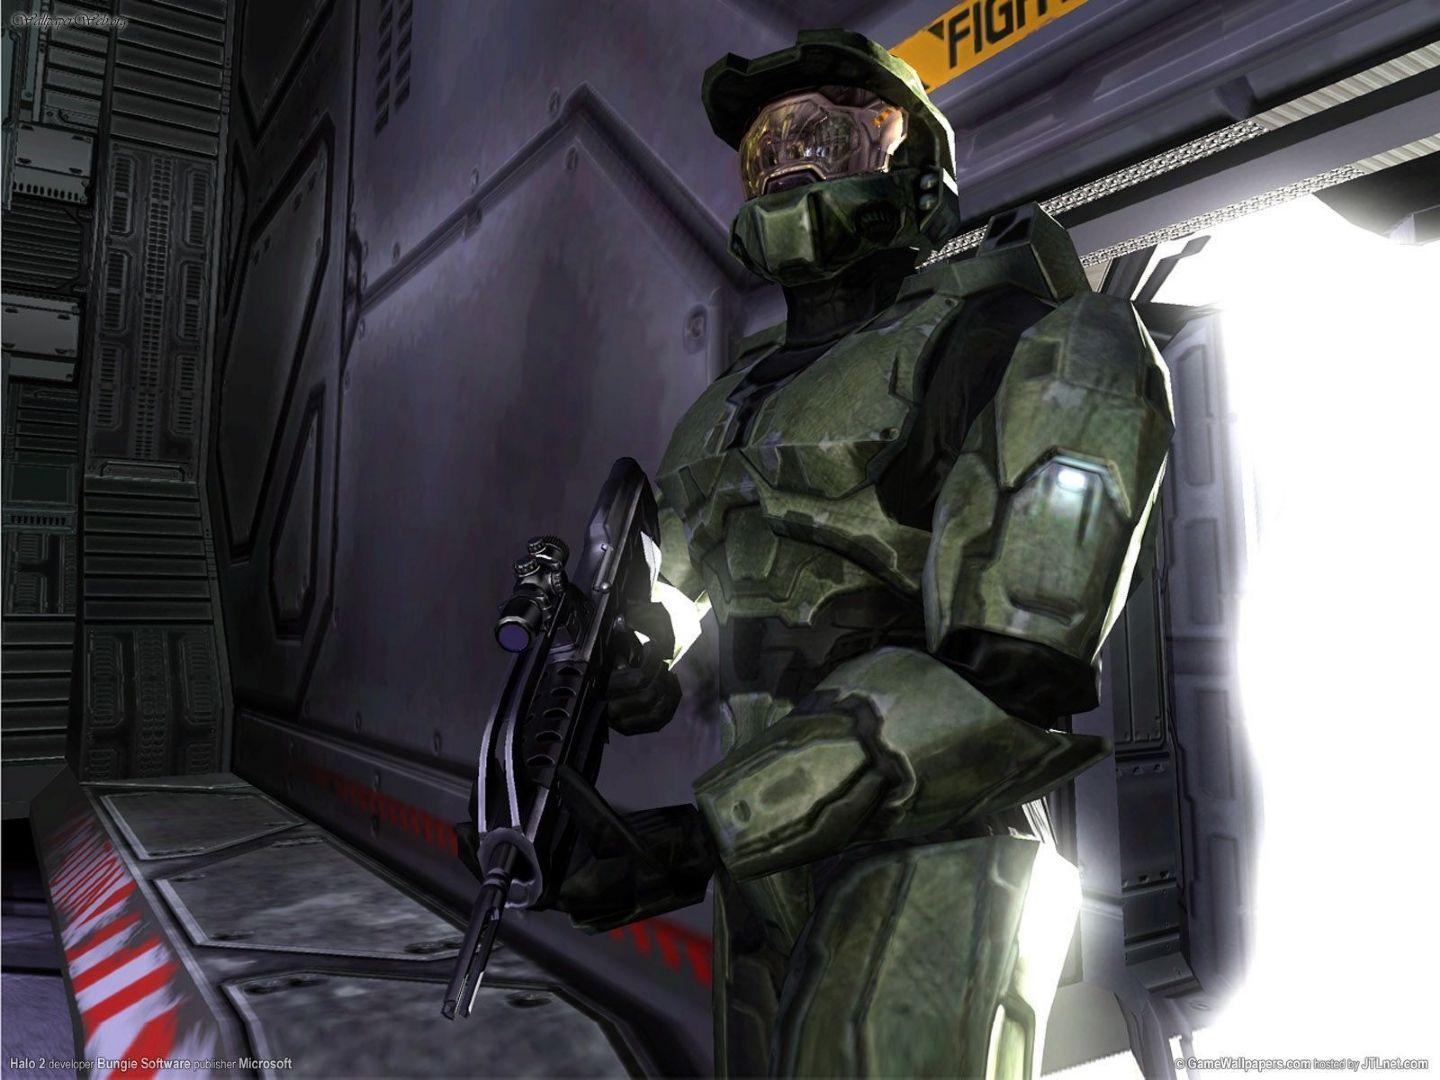 Games: Halo picture nr. 29728